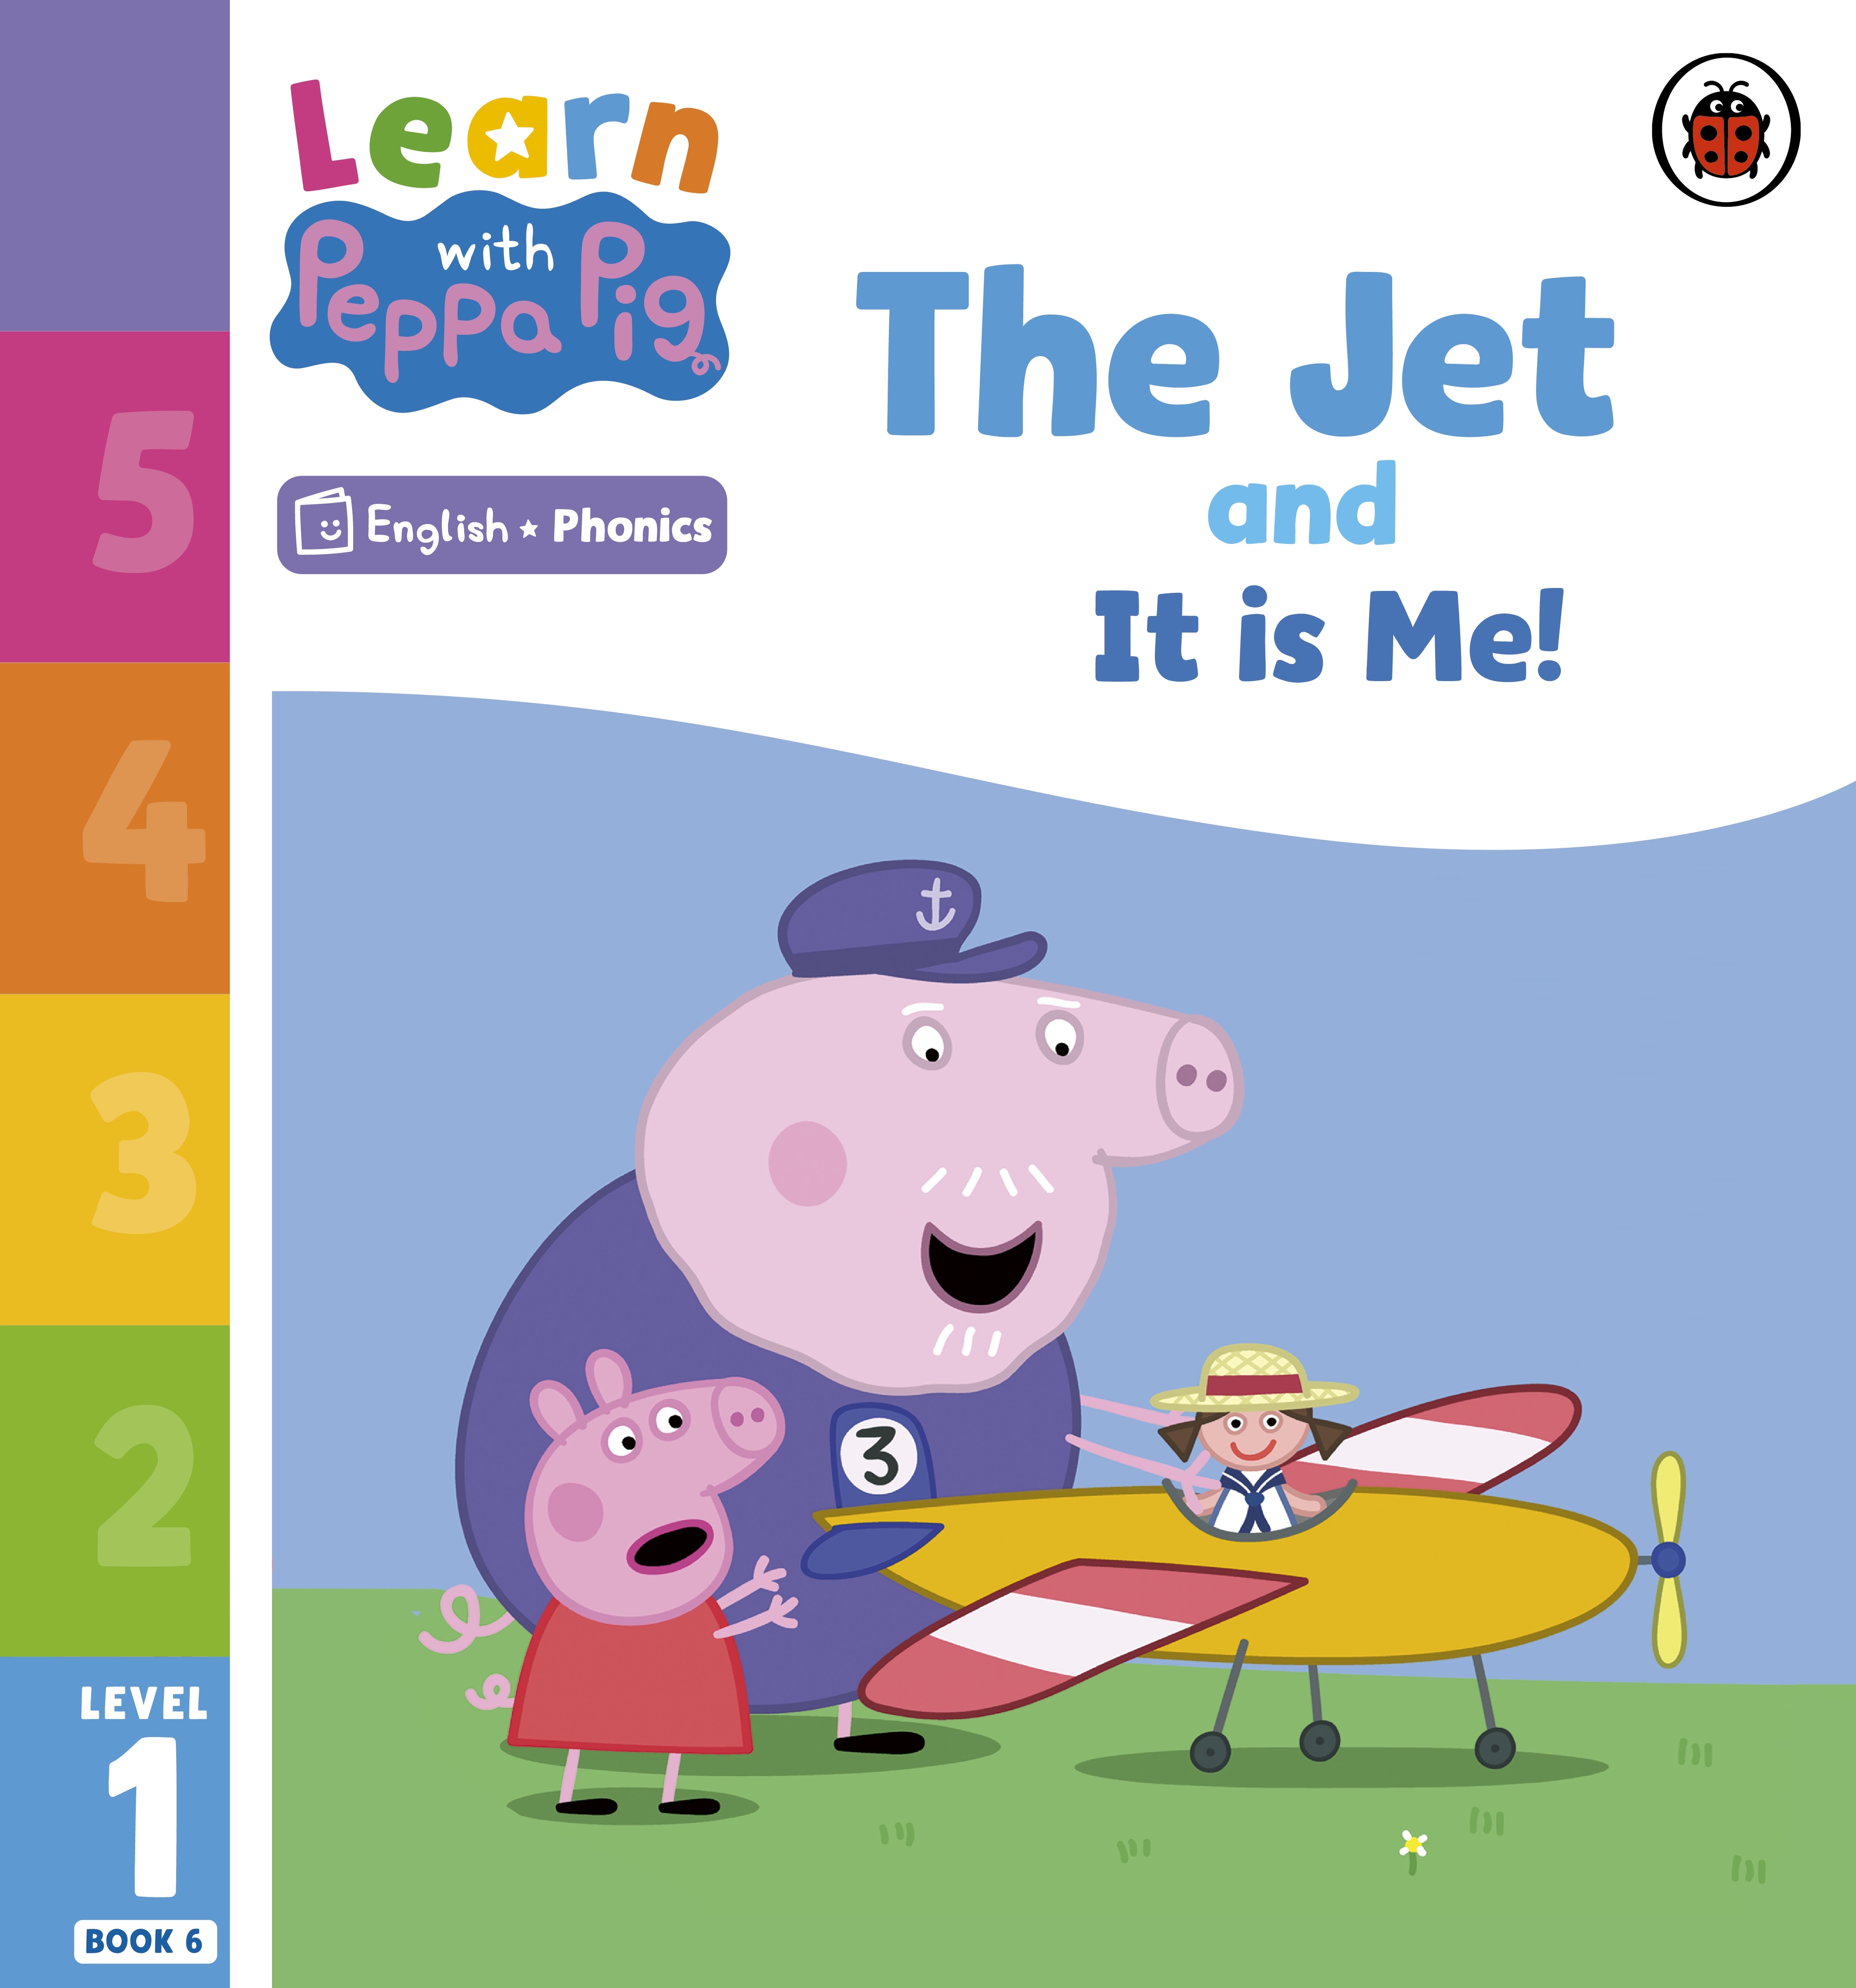 Book “Learn with Peppa Phonics Level 1 Book 6 — The Jet and It is Me! (Phonics Reader)” by Peppa Pig — January 5, 2023